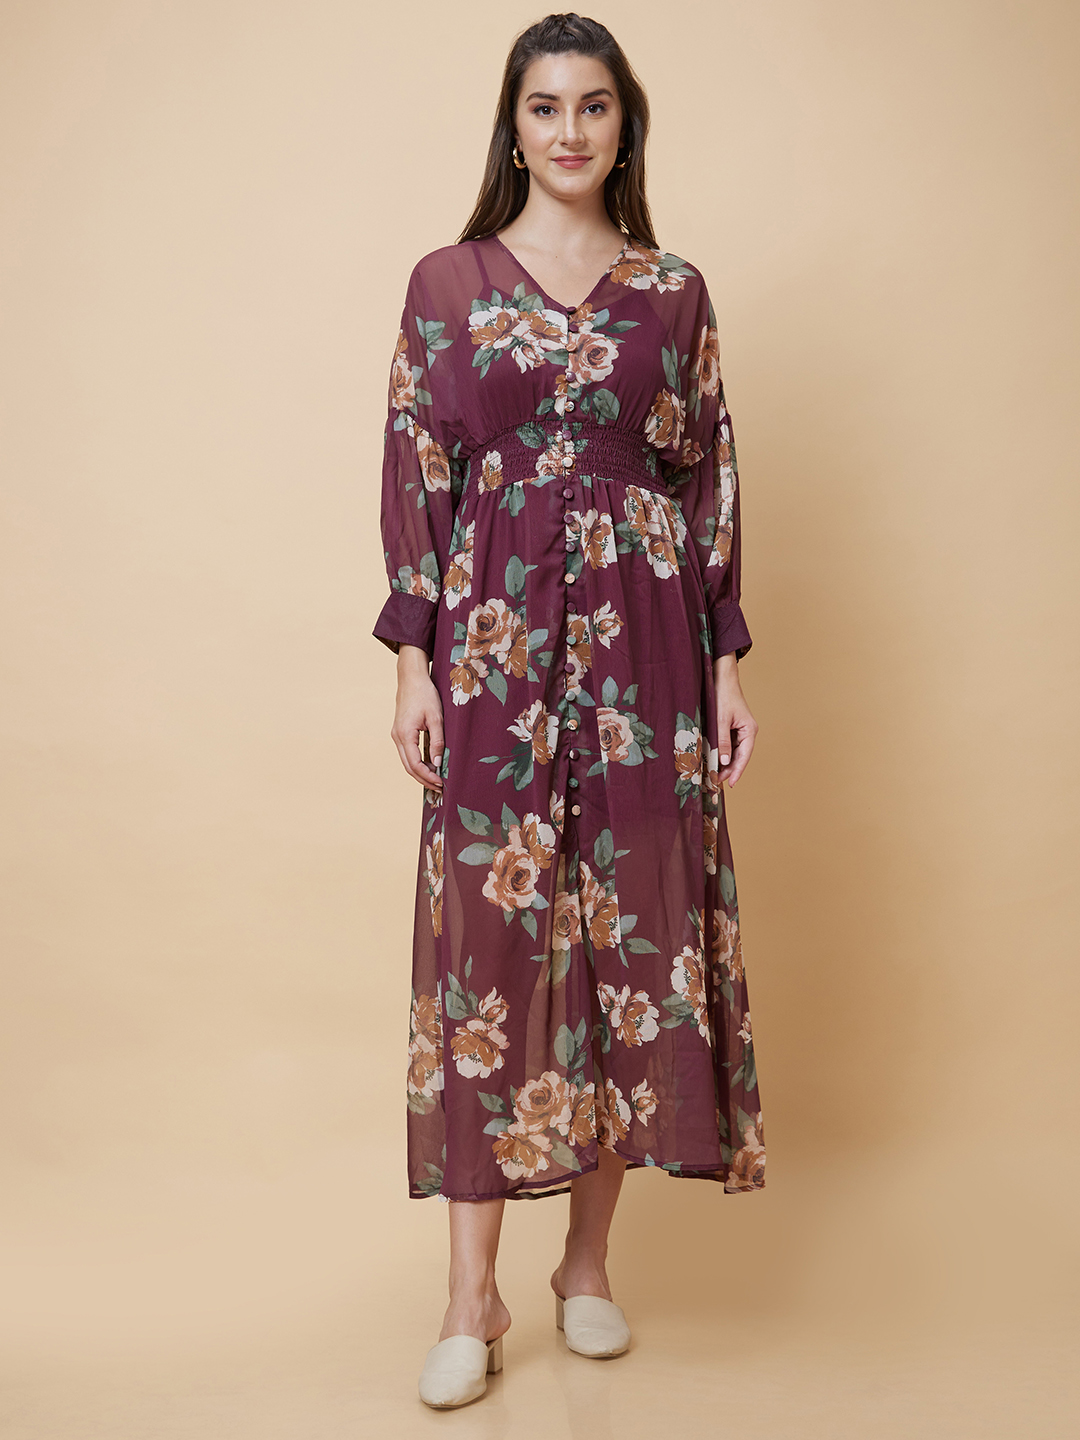 Globus Women Brown Floral Print V-Neck Smocked Casual Fit And Flare Maxi Dress